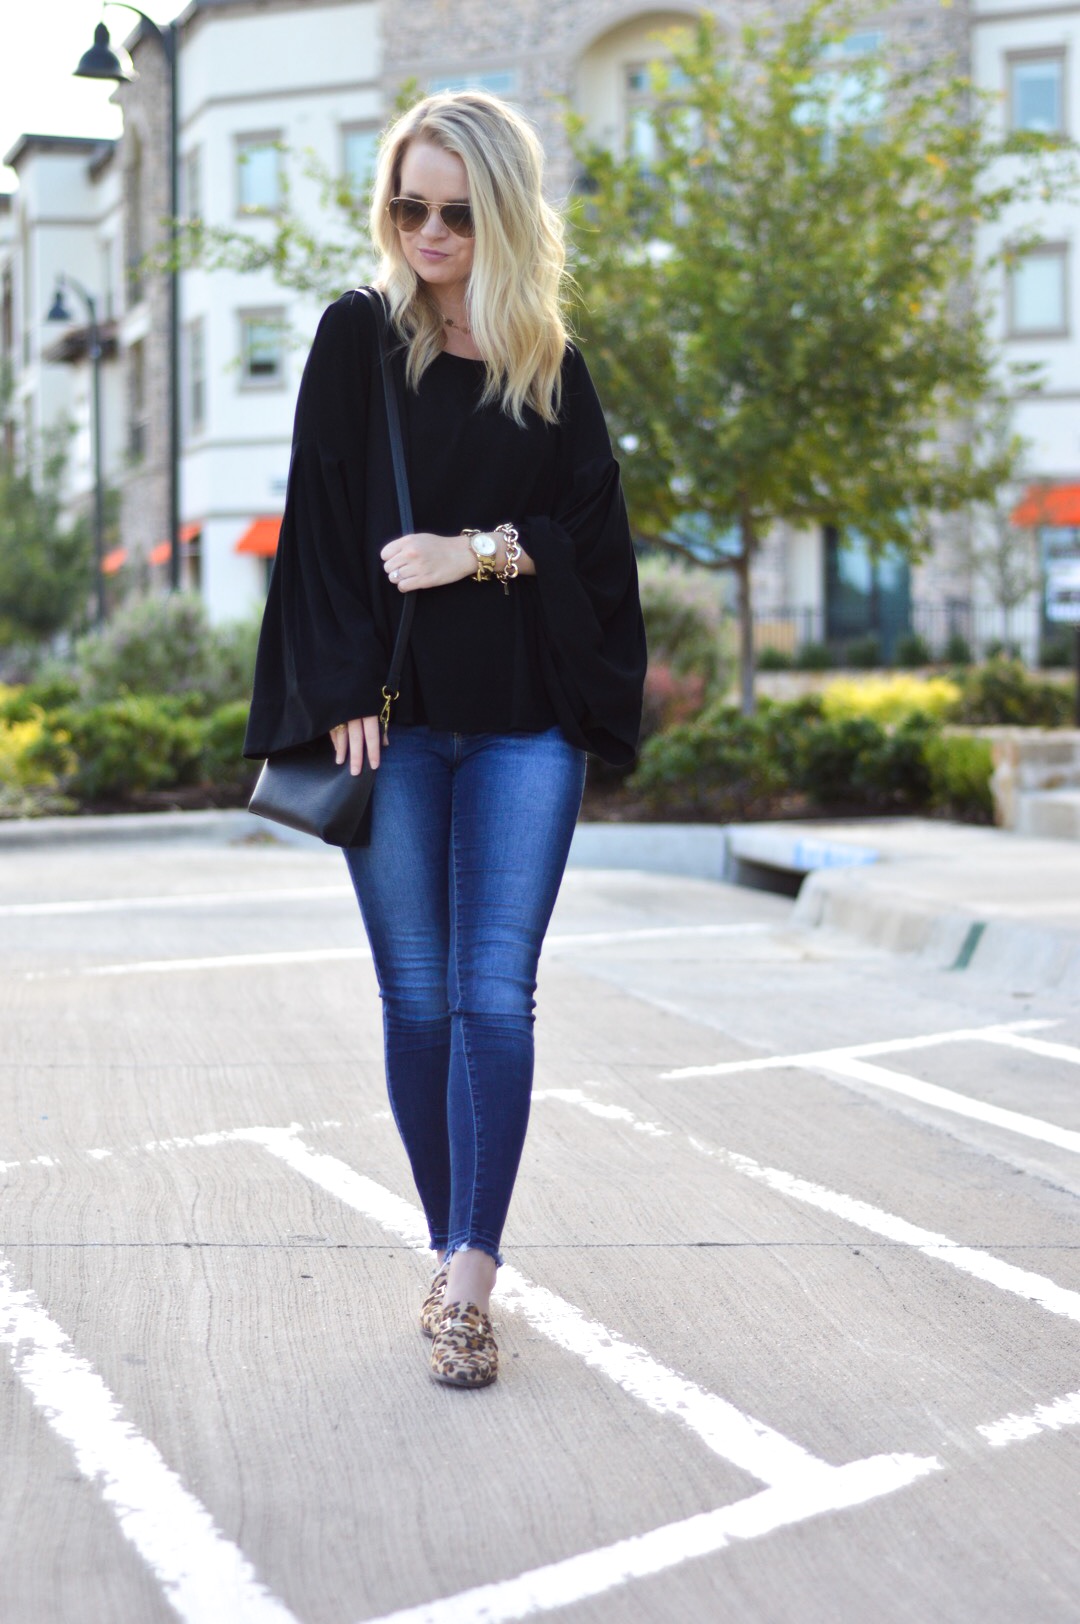 Transitional Fall Outfit